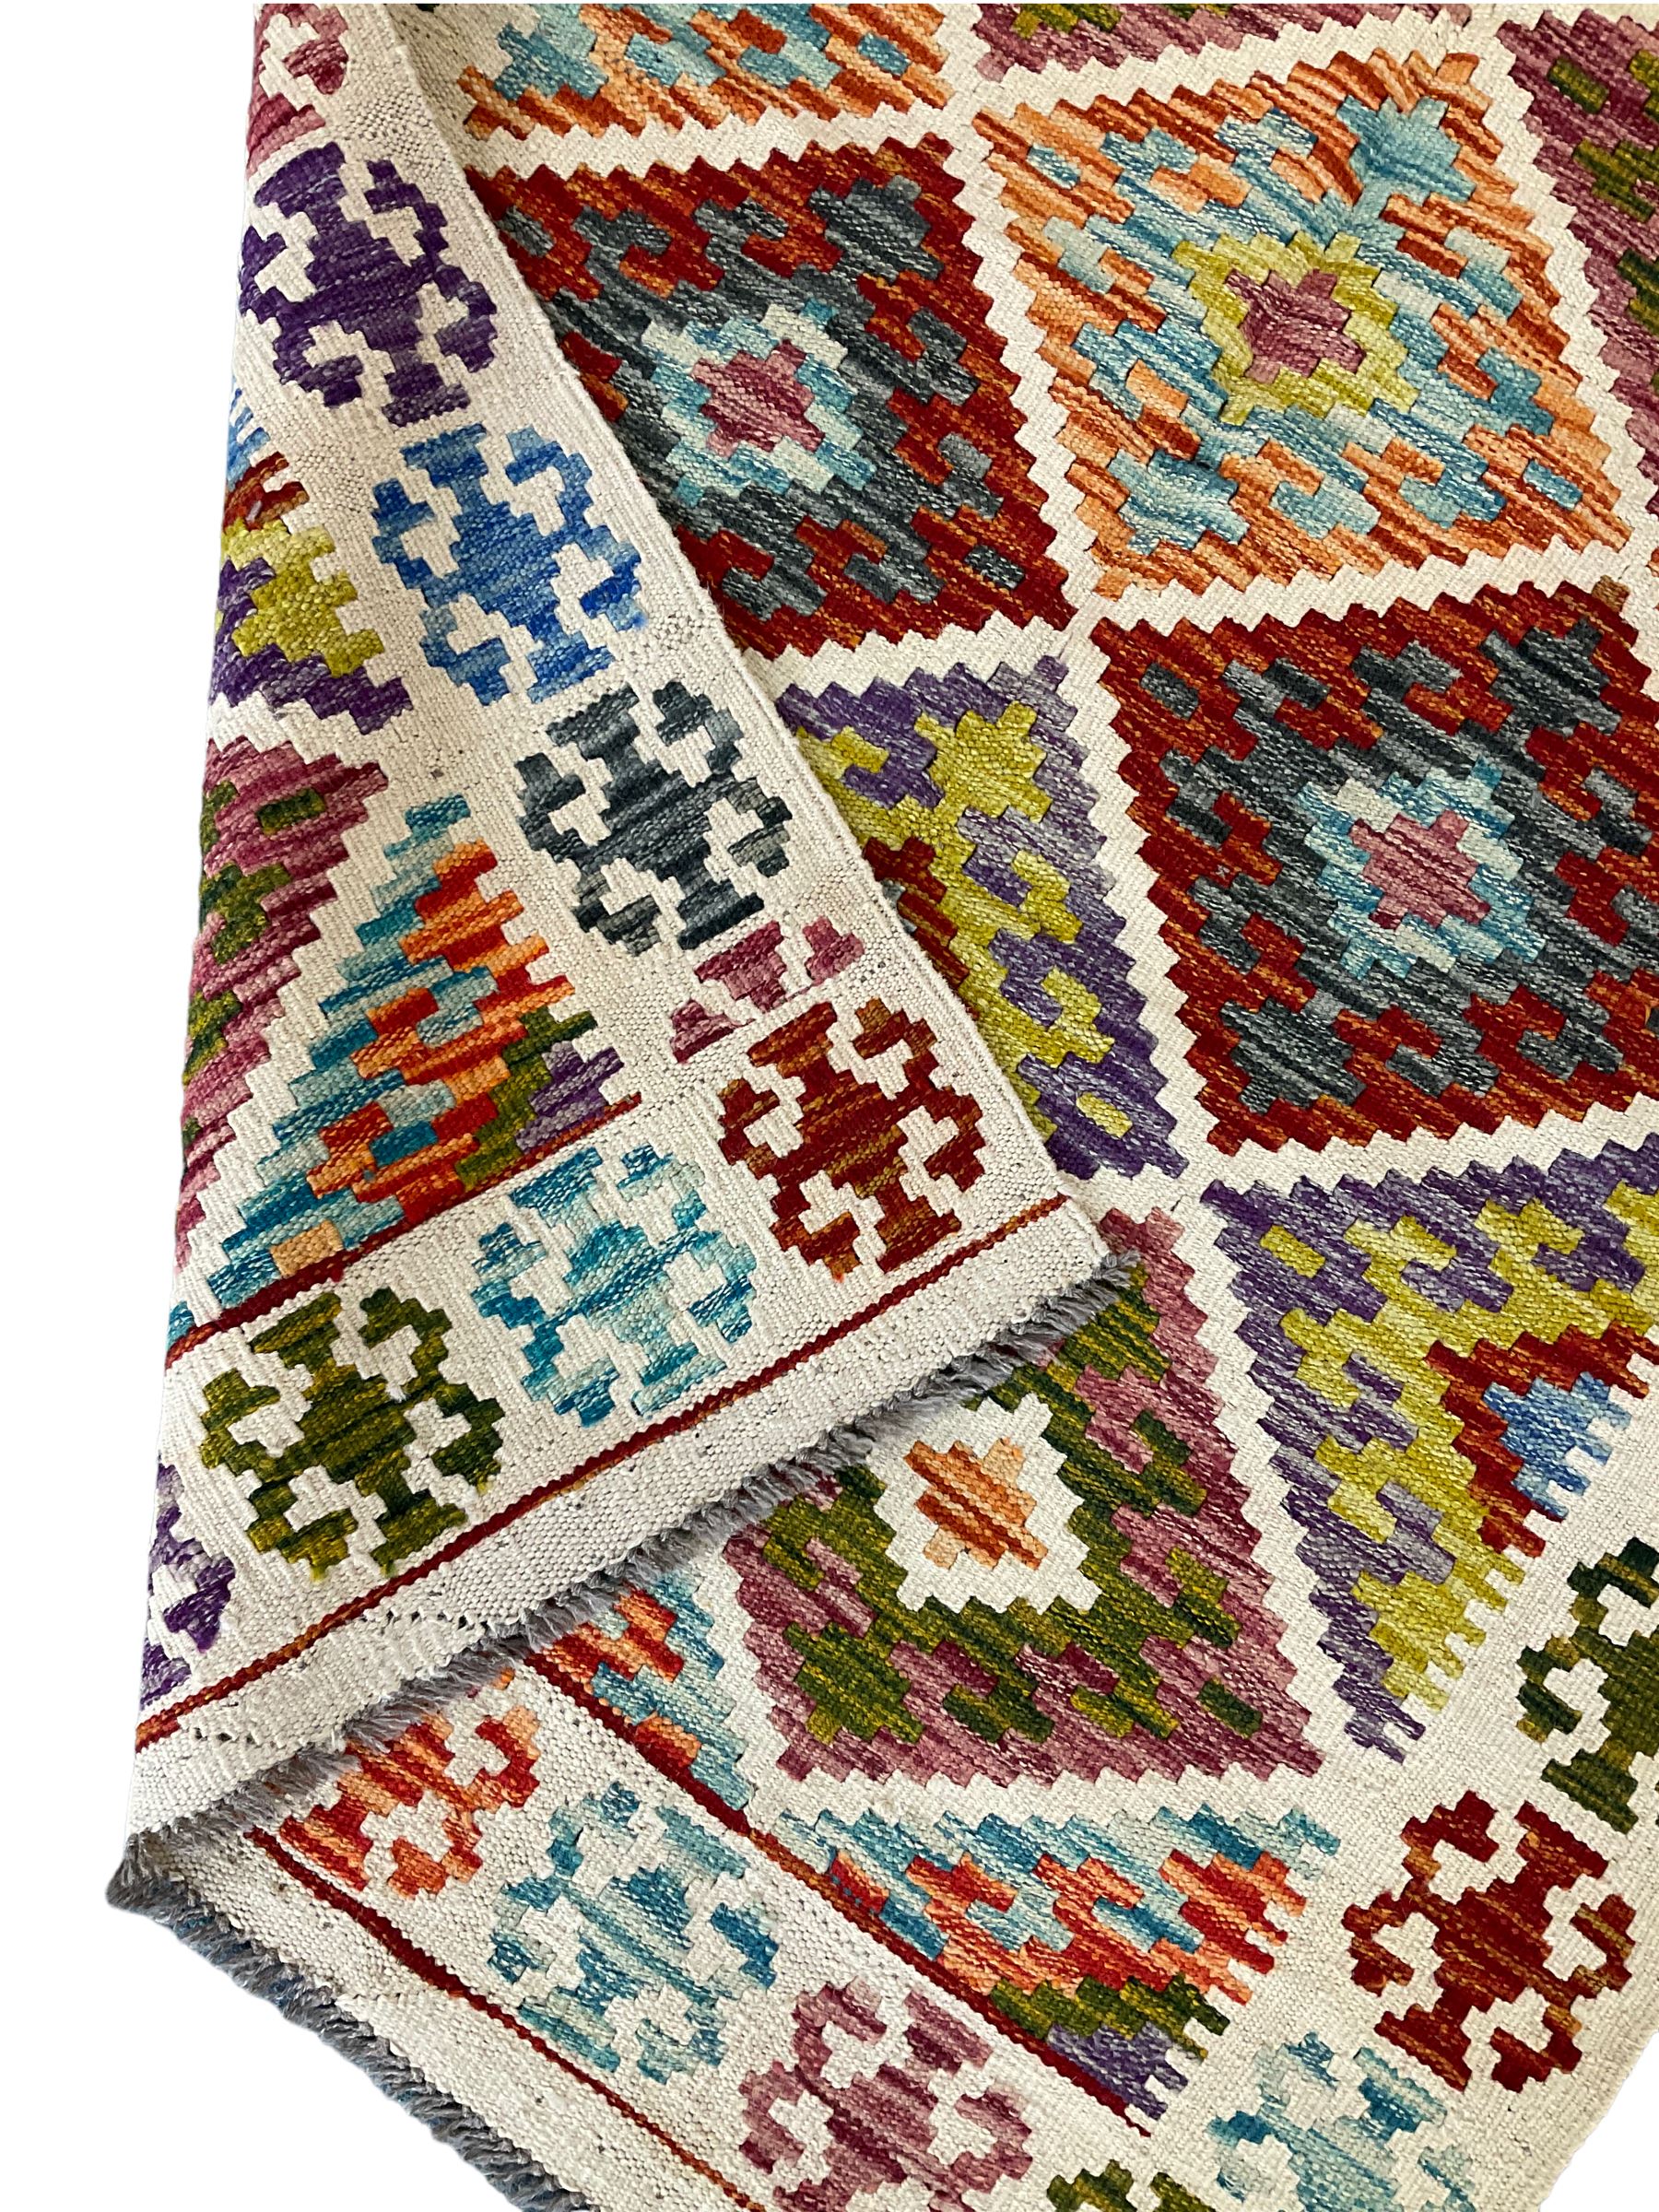 Chobi Kilim ivory and multi-colour rug decorated with stepped geometric lozenges and repeating borde - Image 3 of 3